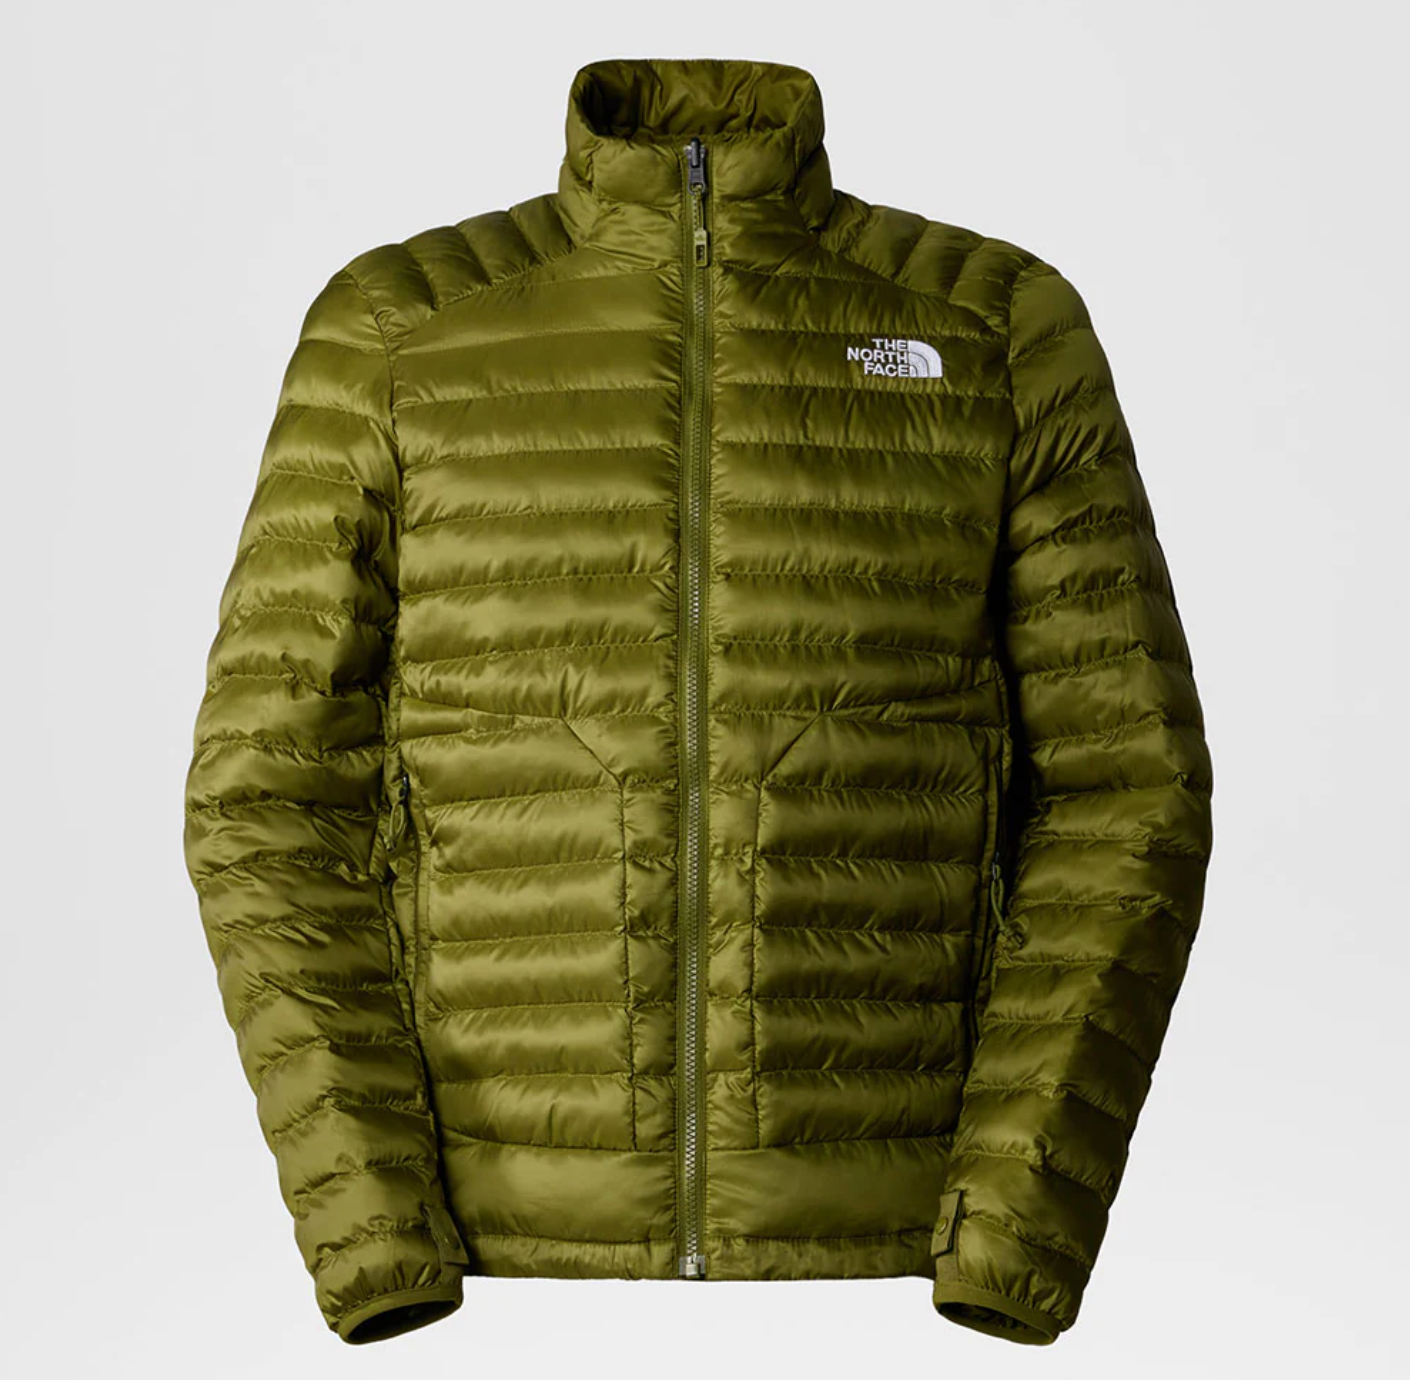 THE NORTH FACE   MEN'S HUILA SYNTHETIC INSULATION JACKET